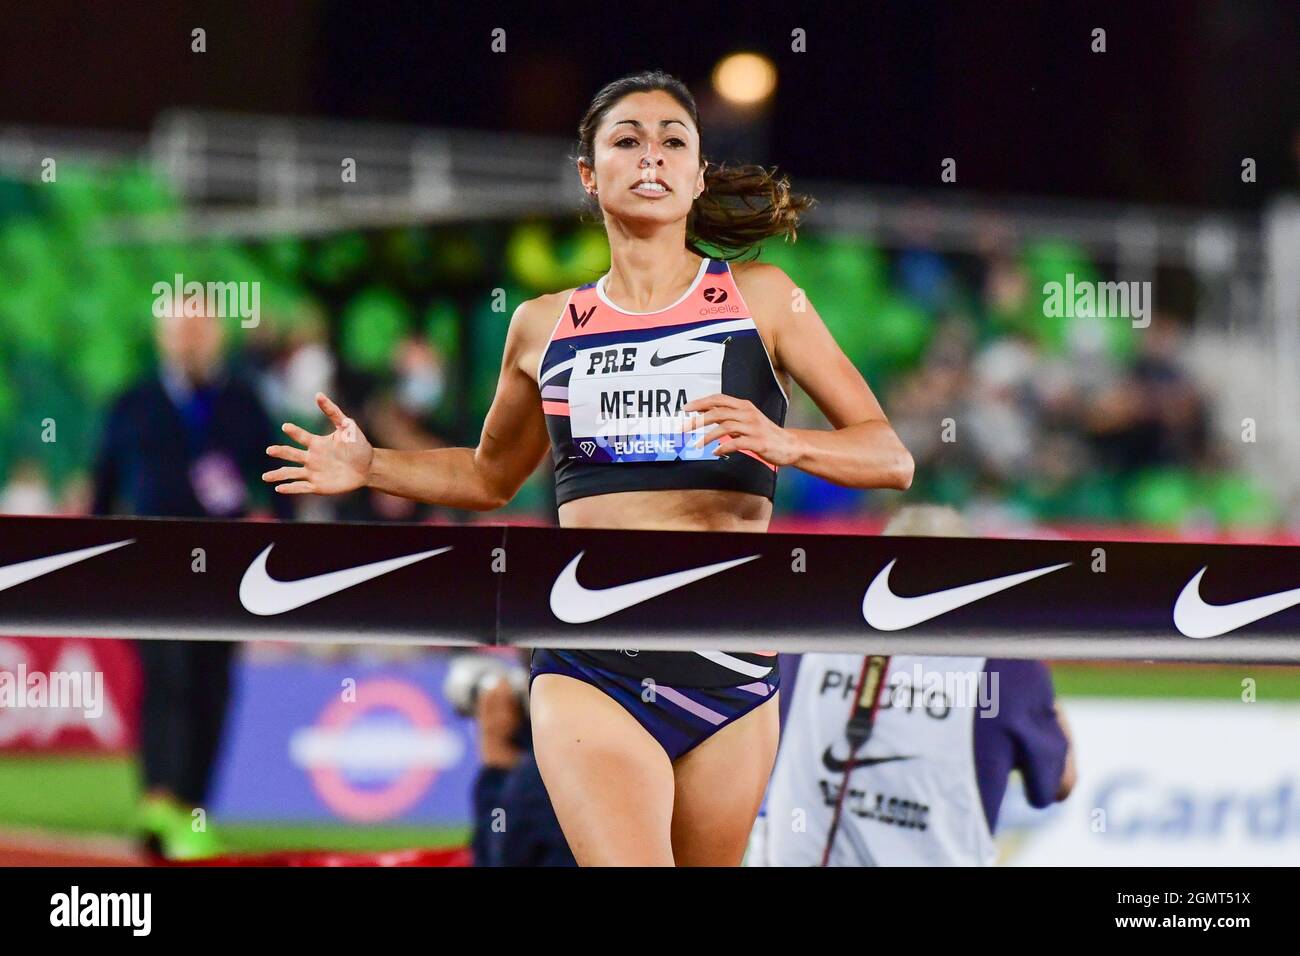 Rebecca Mehra (USA) wins the 1500m in 4:06.35 during the 46th Prefontaine Classic, Friday, Aug. 20, 2021, in Eugene, Ore. (Dylan Stewart/Image of Spor Stock Photo